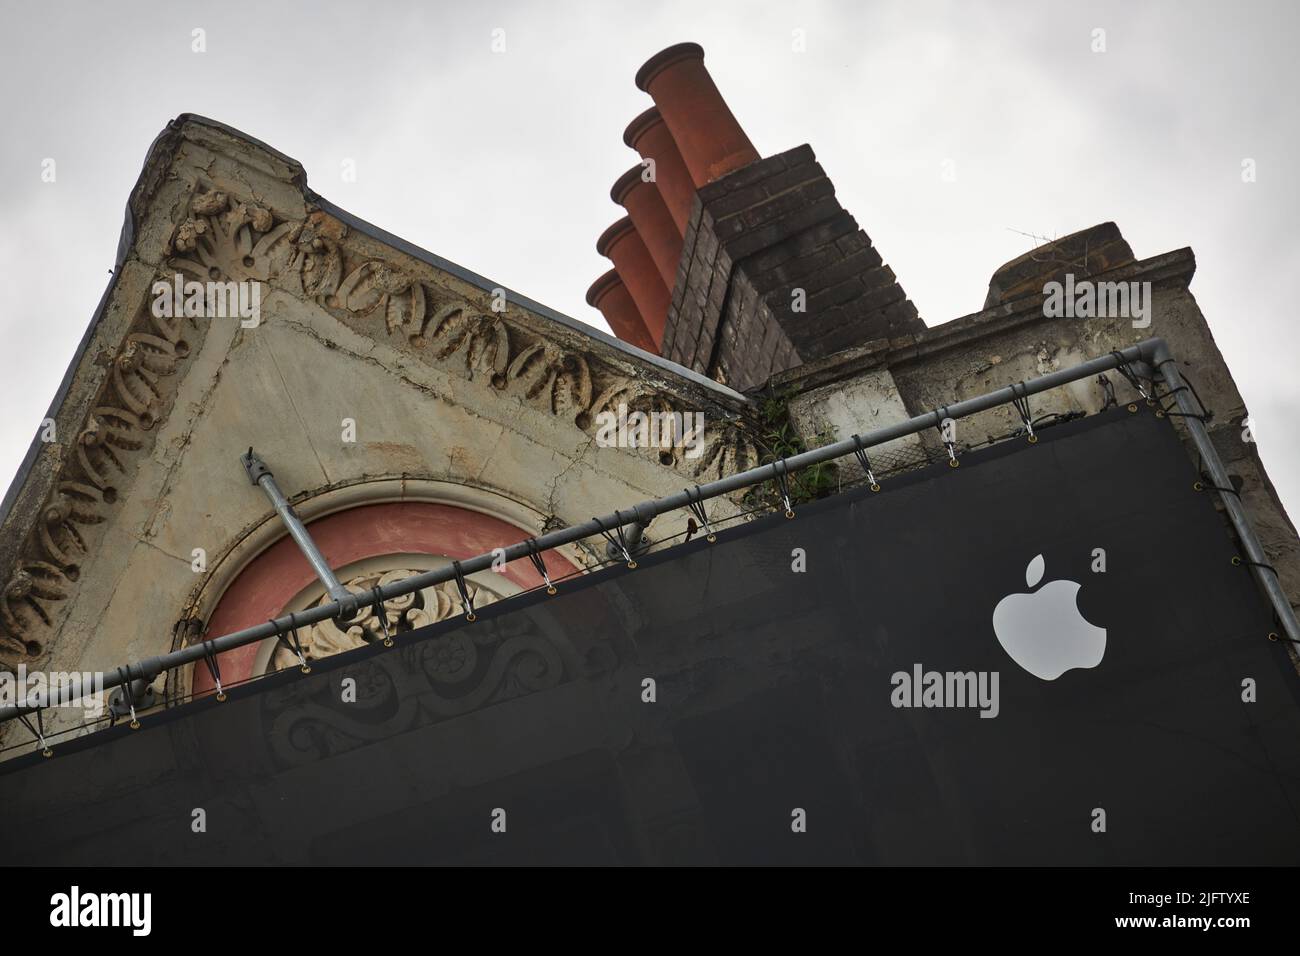 Modern Apple advert covering traditional London building. Stock Photo